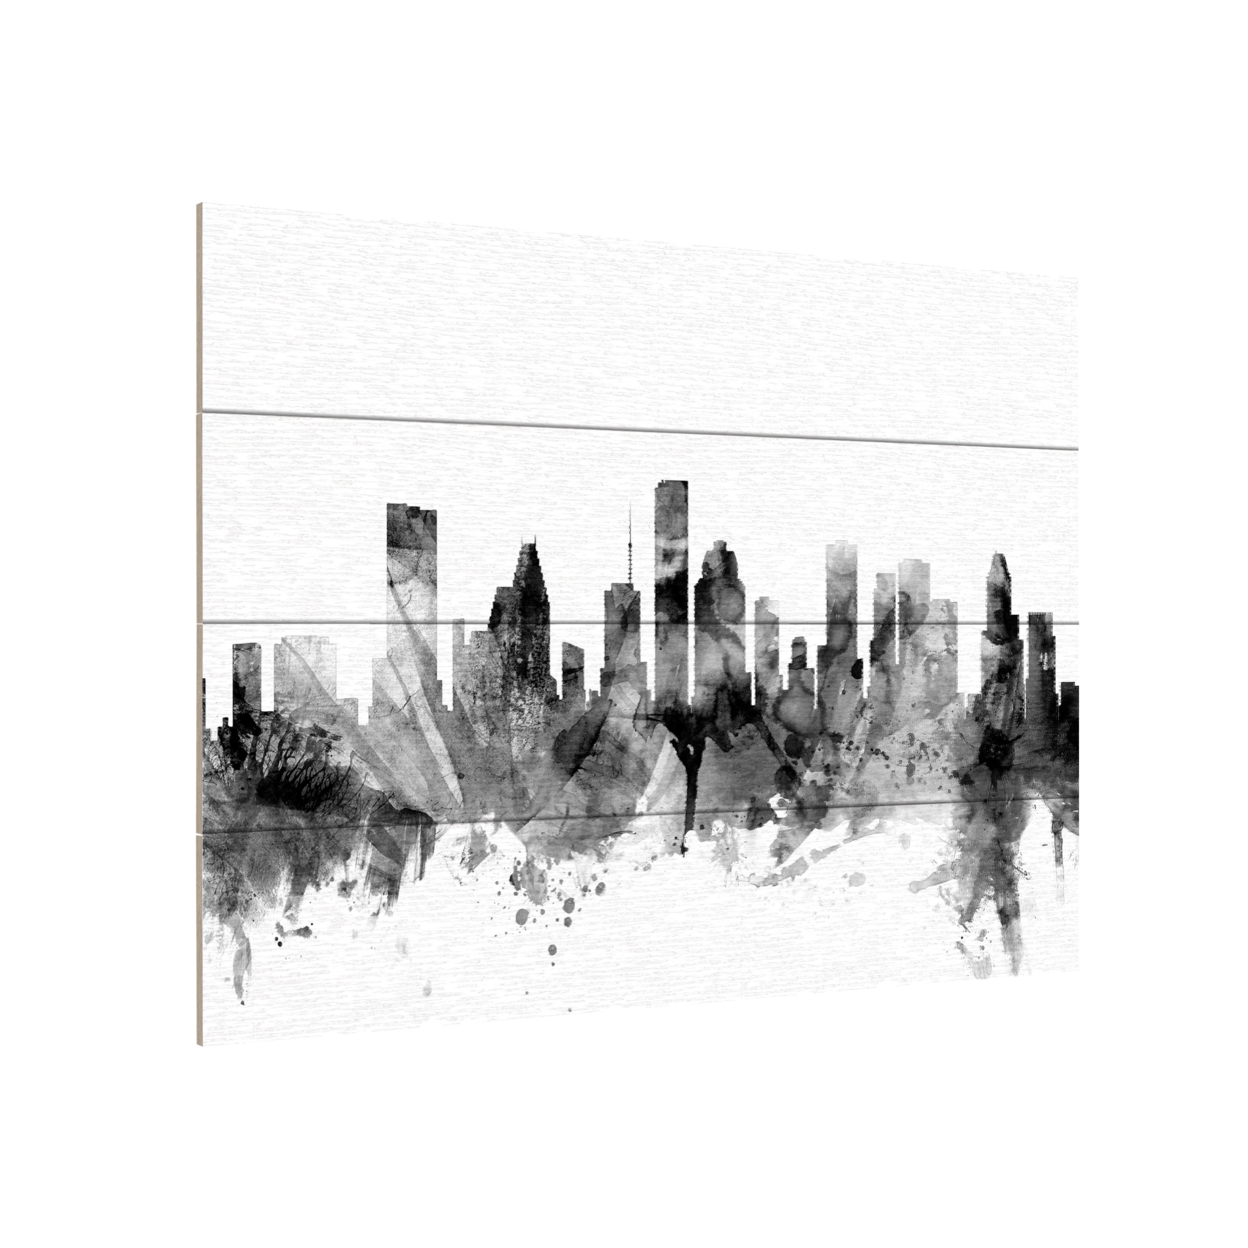 Wall Art 12 X 16 Inches Titled Houston Texas Skyline B&W Ready To Hang Printed On Wooden Planks